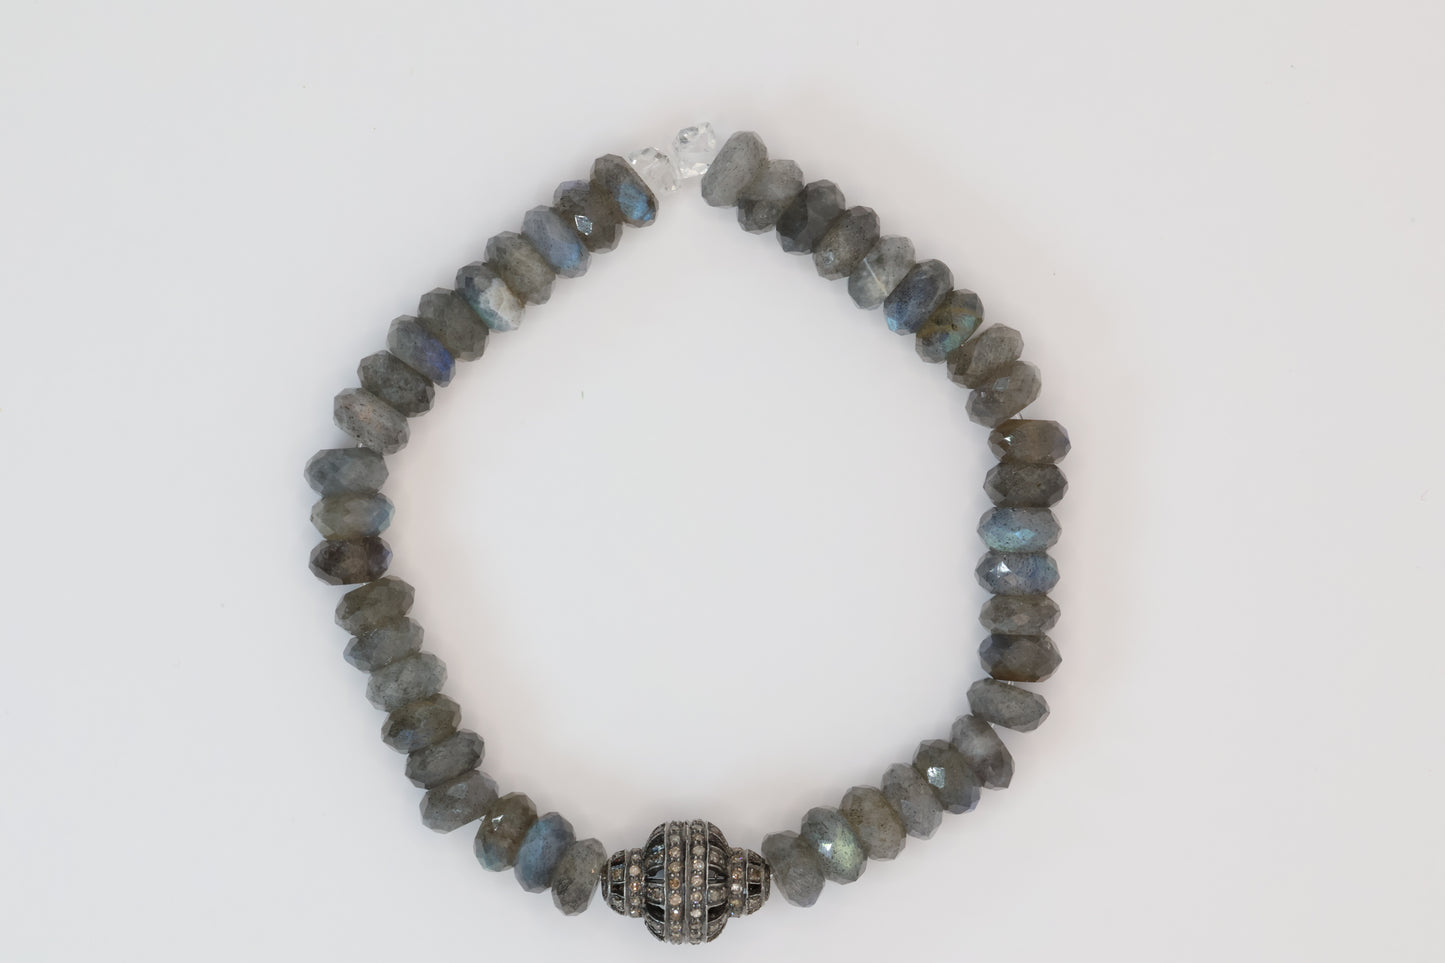 Labradorite Bracelet with Pave Moroccan Style Diamond Bead with Herkimer Diamond Accents